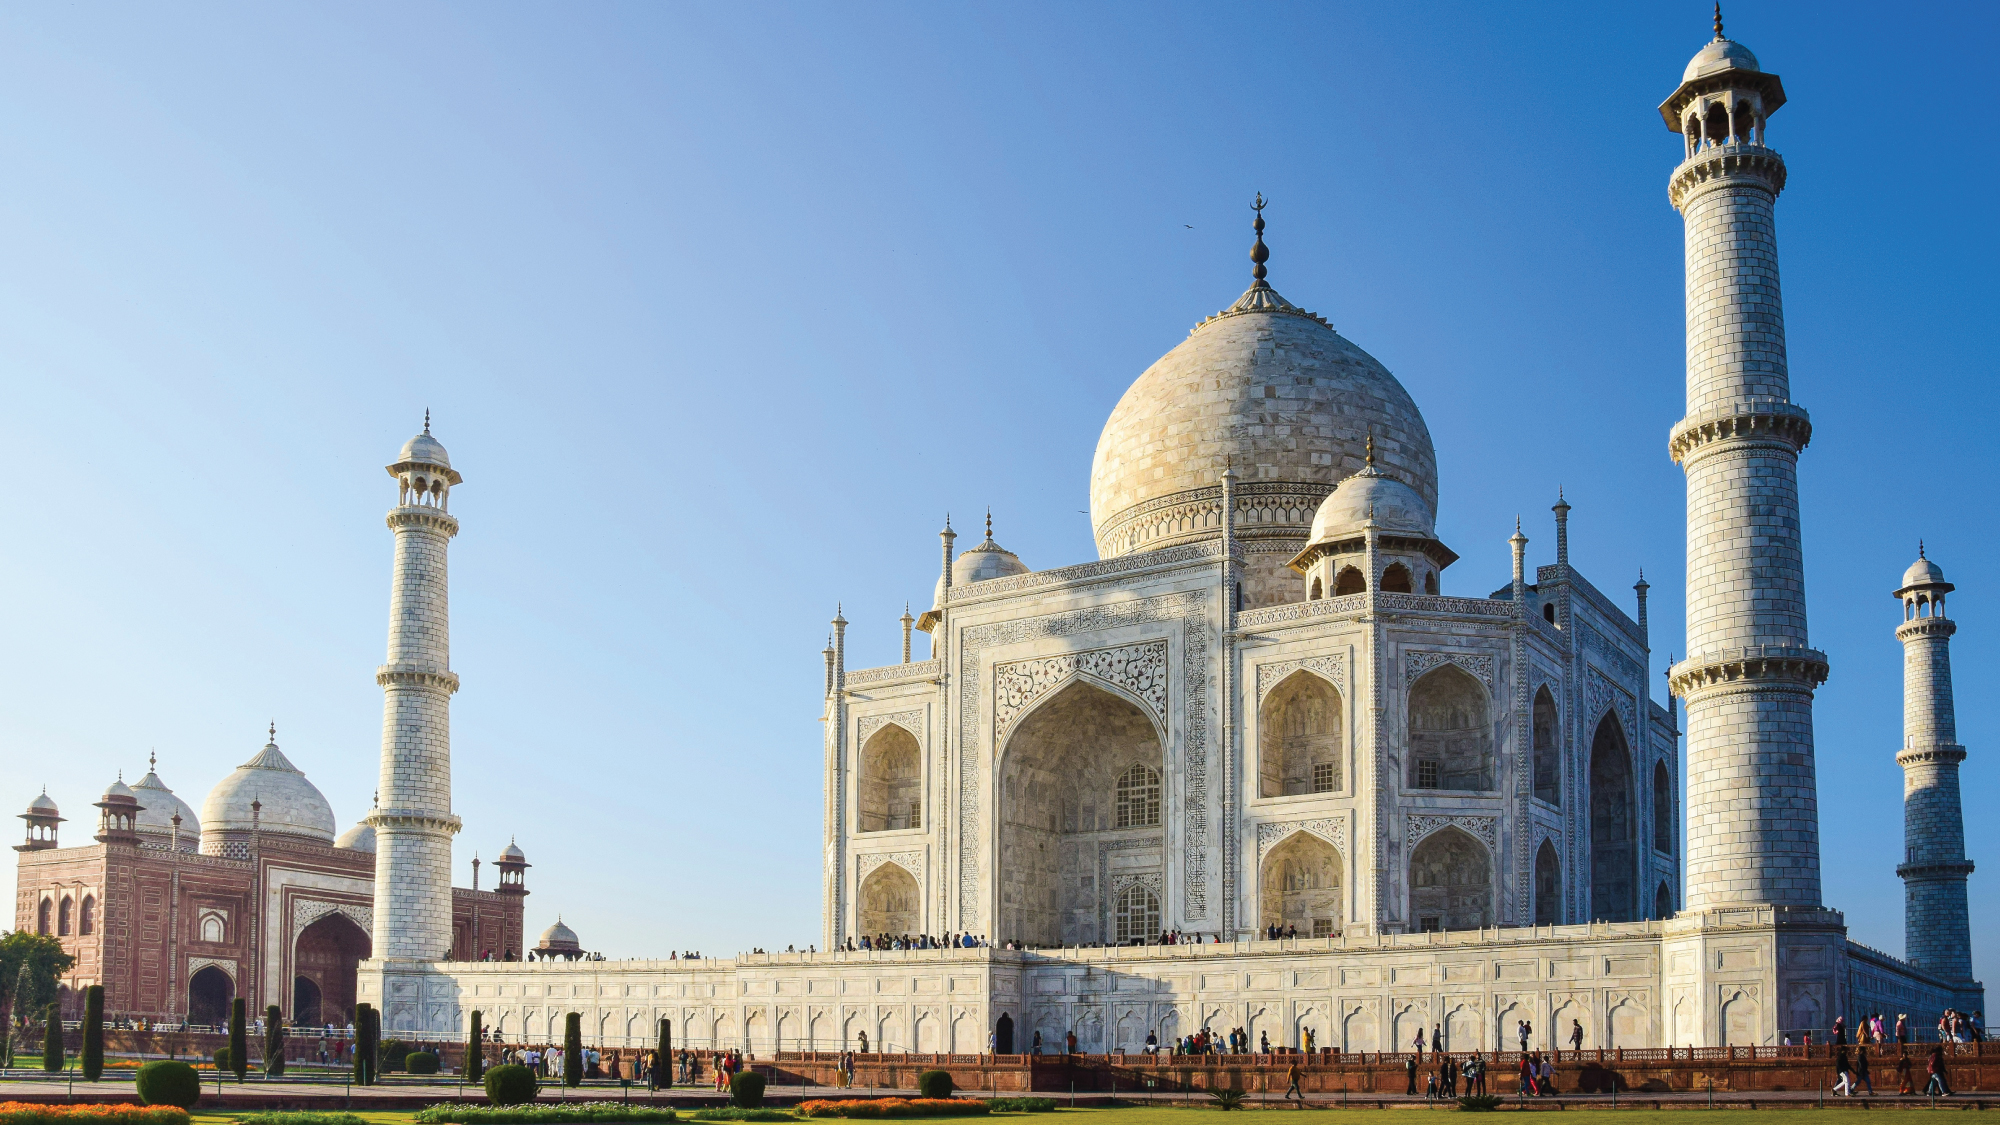 The iconic Taj Mahal surrounded by lush gardens.